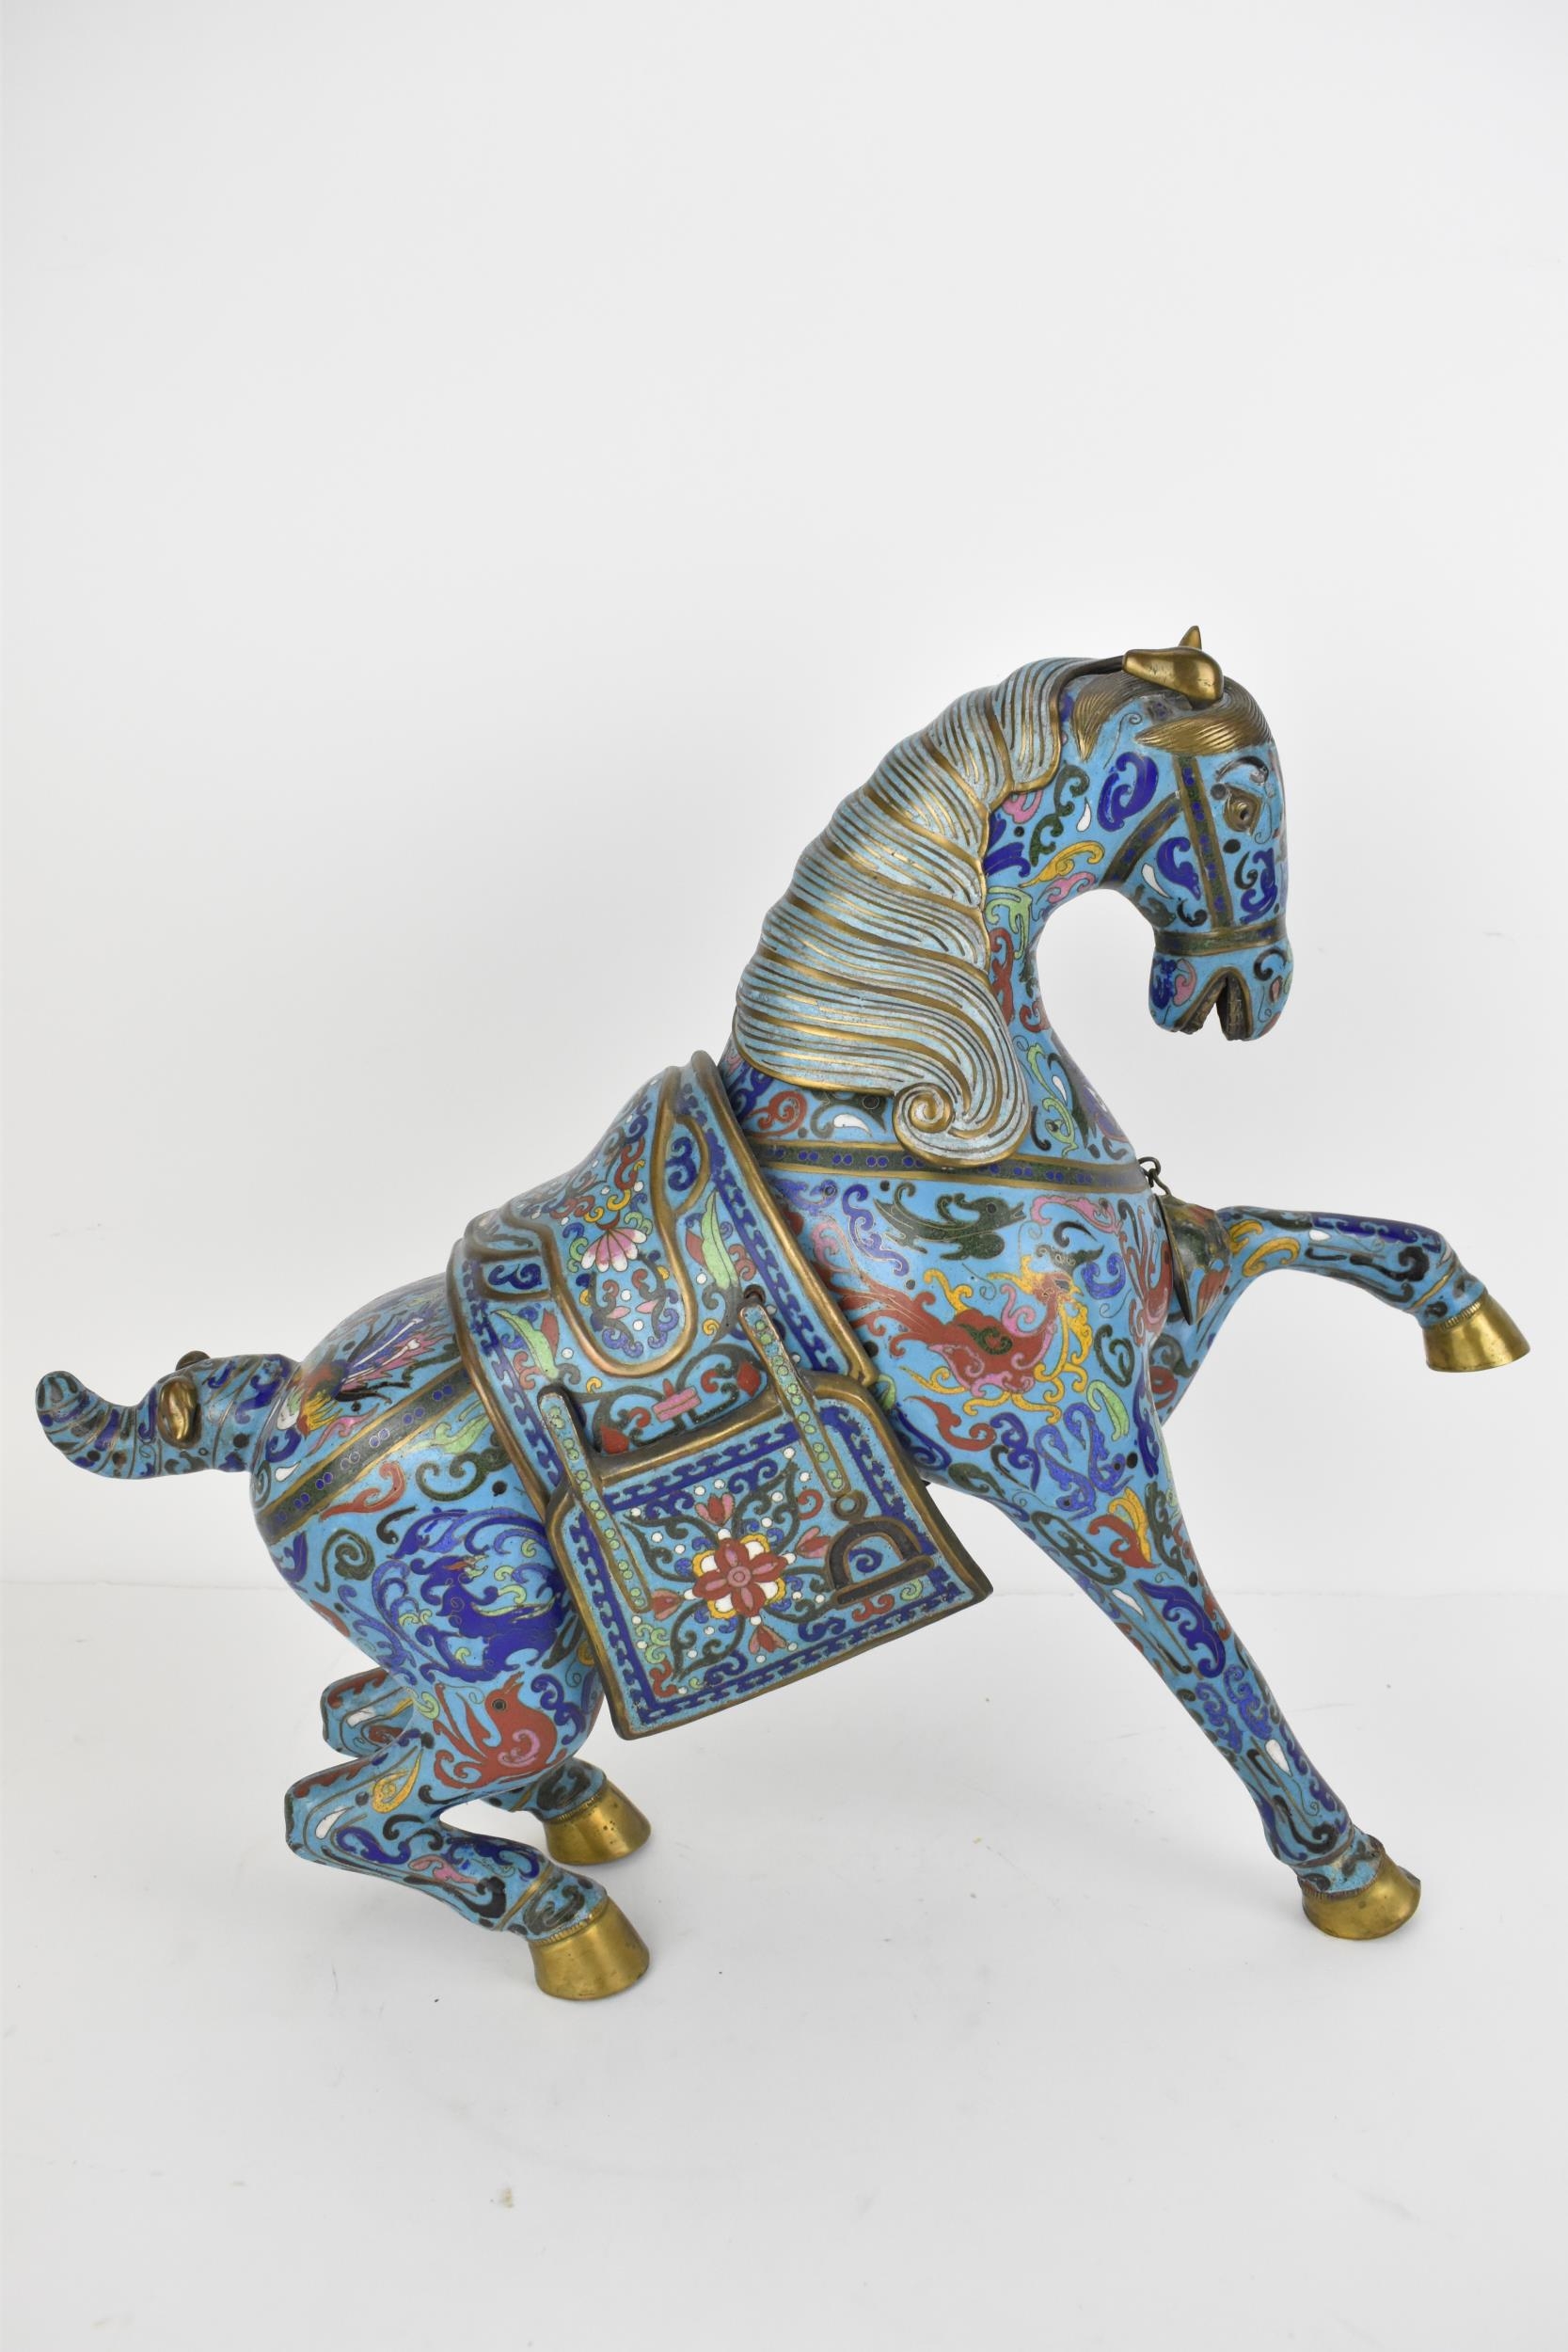 A large Chinese cloisonné enamel mode of a rearing horse, 41cm h